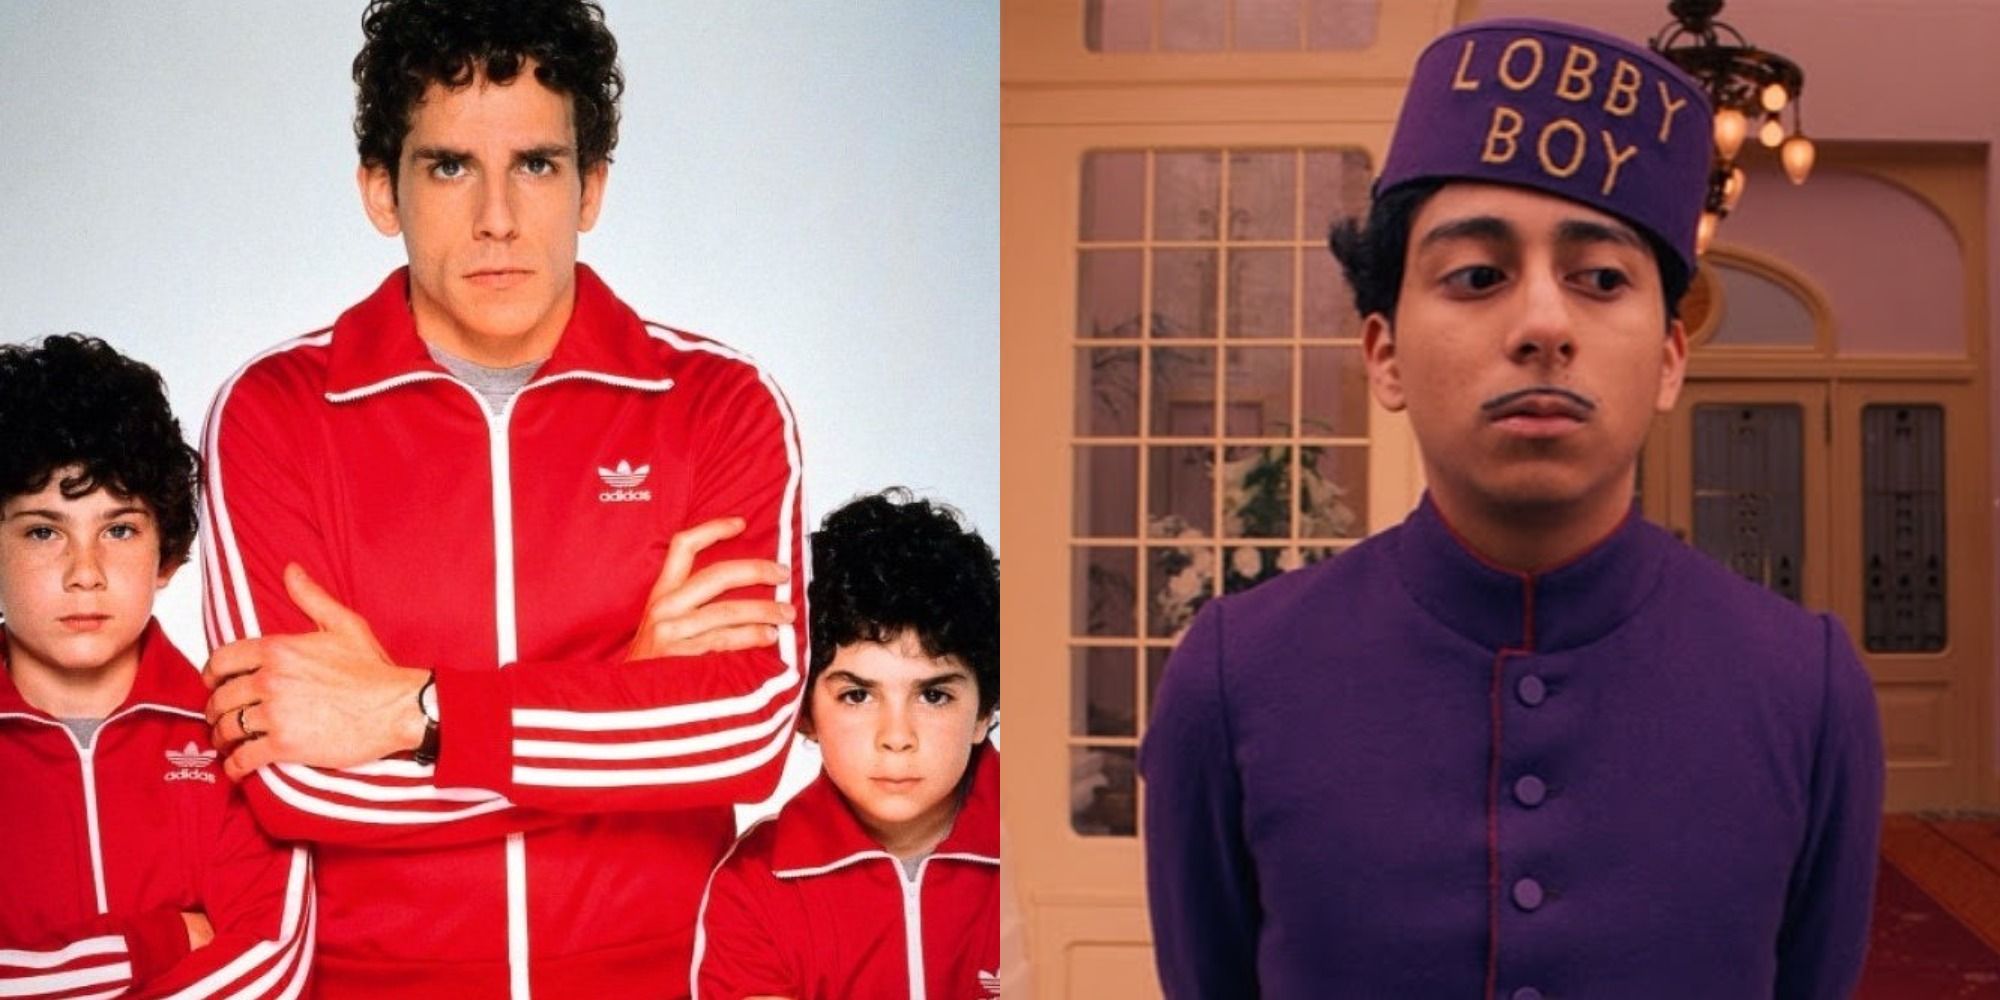 Split image of Ben Stiller & 2 kids in matching red track suits and Tony Revolori as a lobby boy.